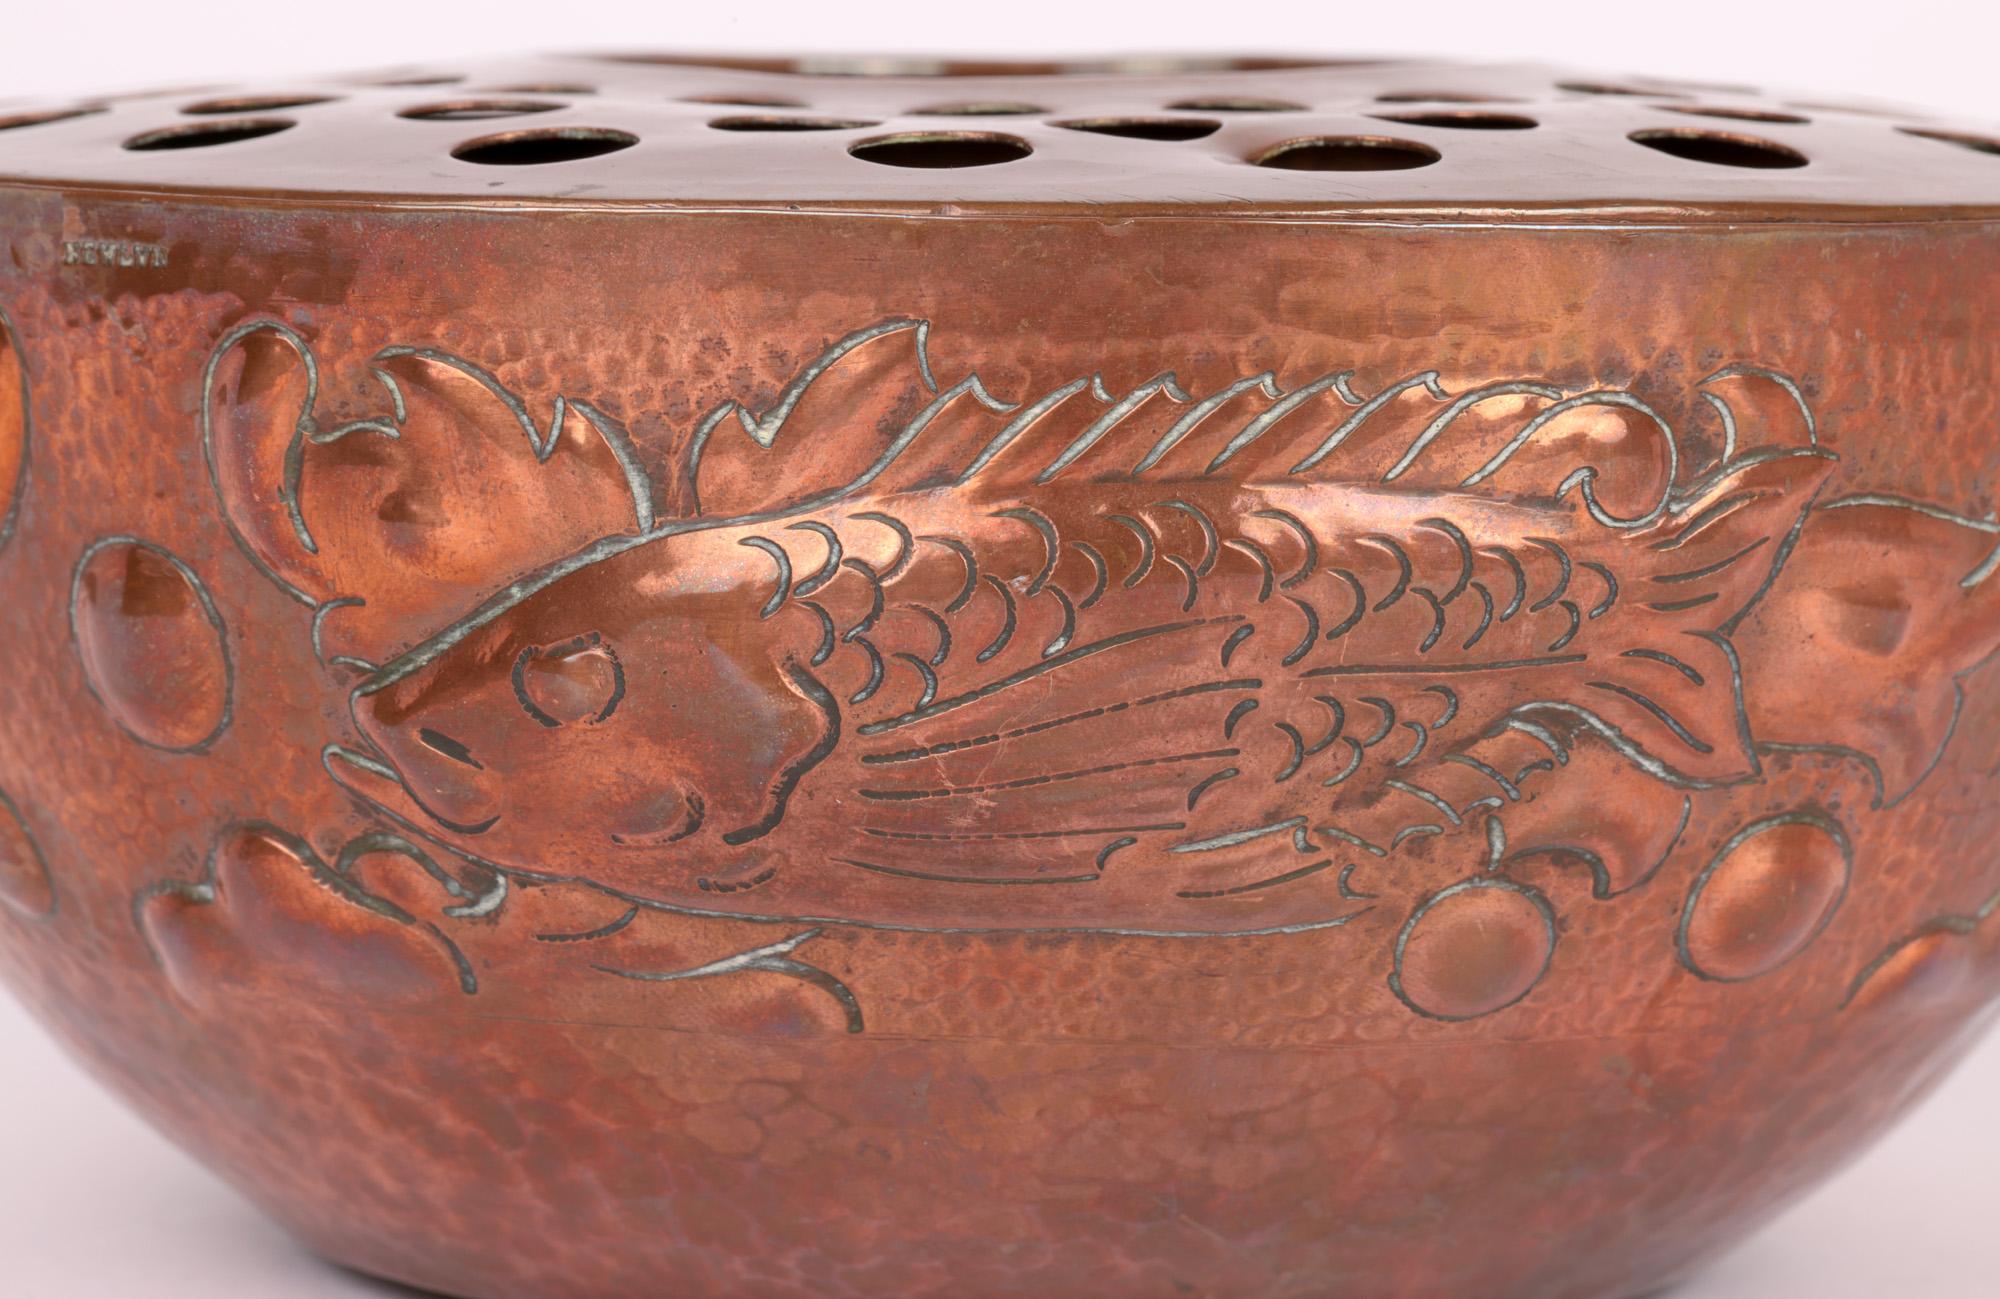 An exceptional English arts & crafts hand crafted copper posy or rose bowl decorated with fish made by renowned Cornish copper workshops Newlyn and dating from around 1900. The bowl has a hand planished finish with a narrow round shaped foot with